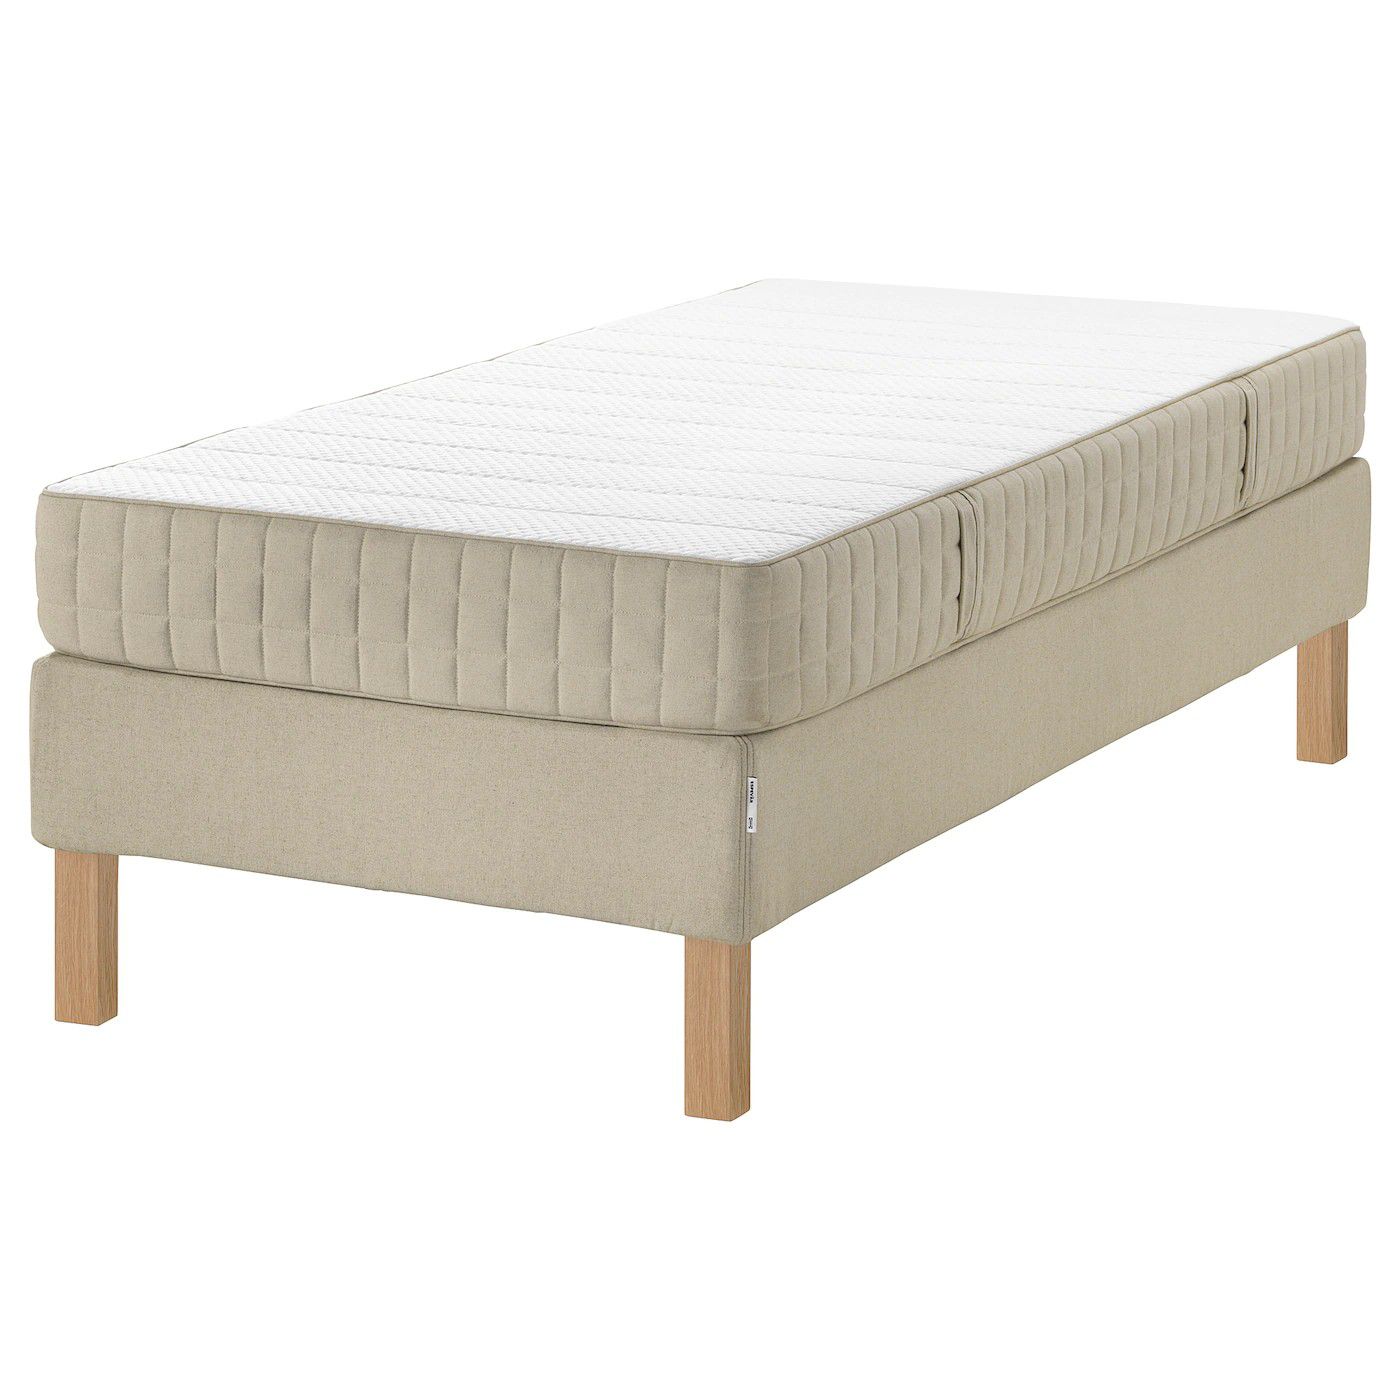 Twin IKEA Bed foundation